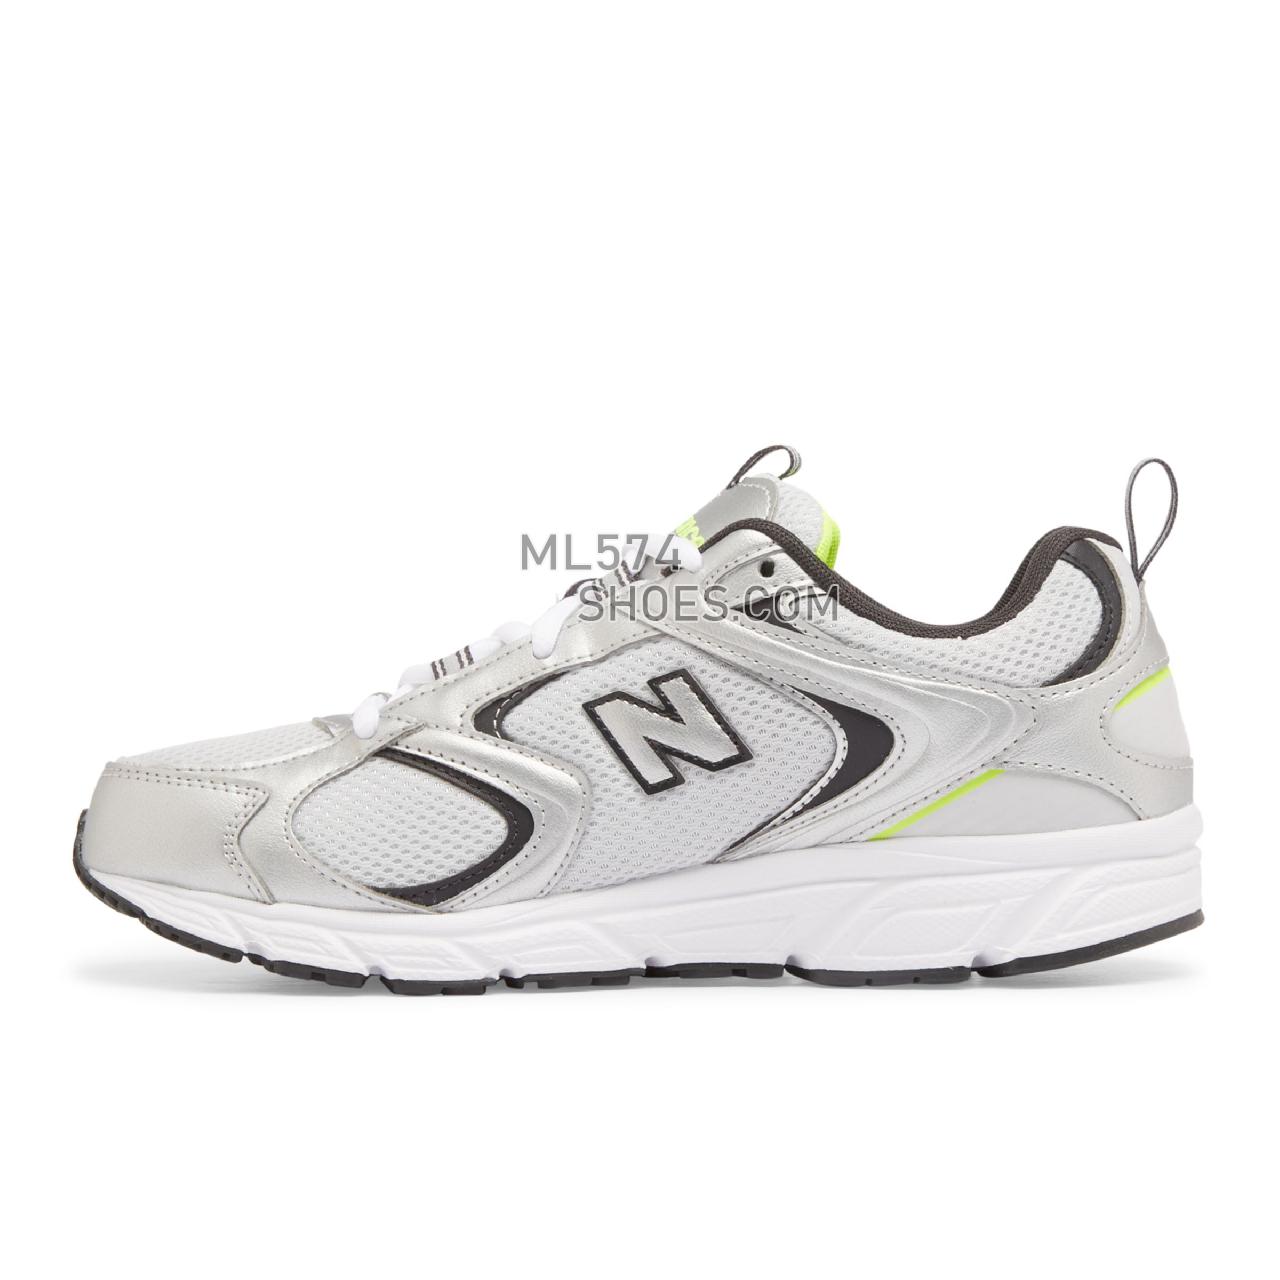 New Balance 408 - Men's Classic Sneakers - Magnet with Black - ML408C